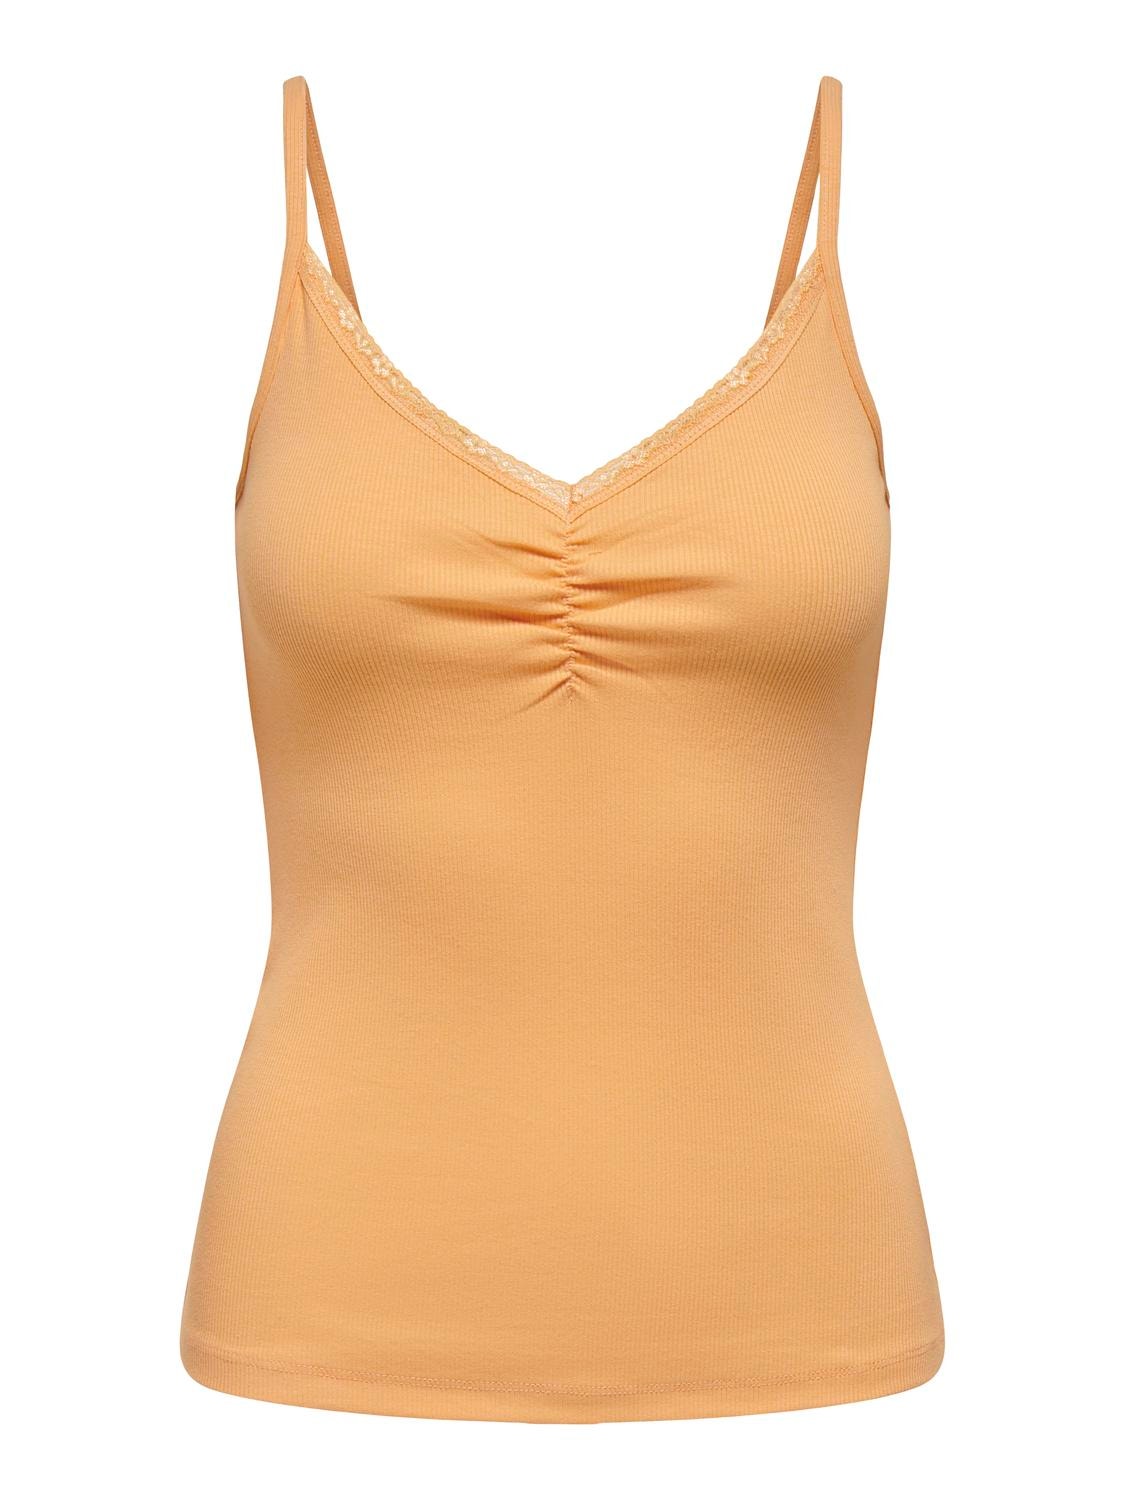 ONLY Singlet Top With Lace Edge -Orange Chiffon - 15289730